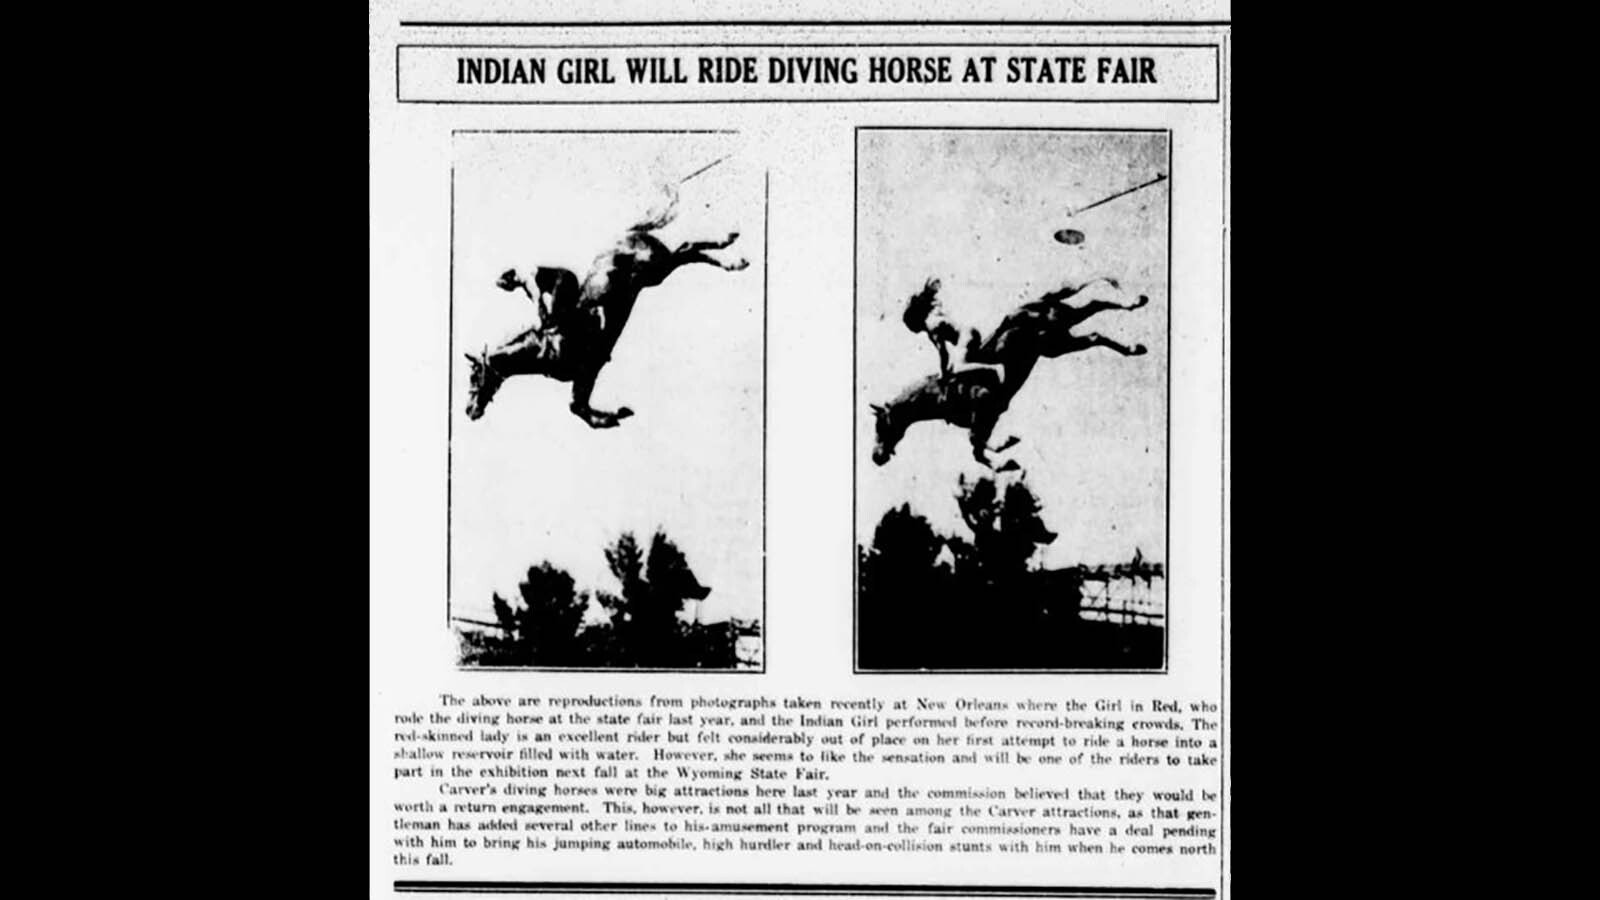 Wyoming state fair advertisement from 1918.